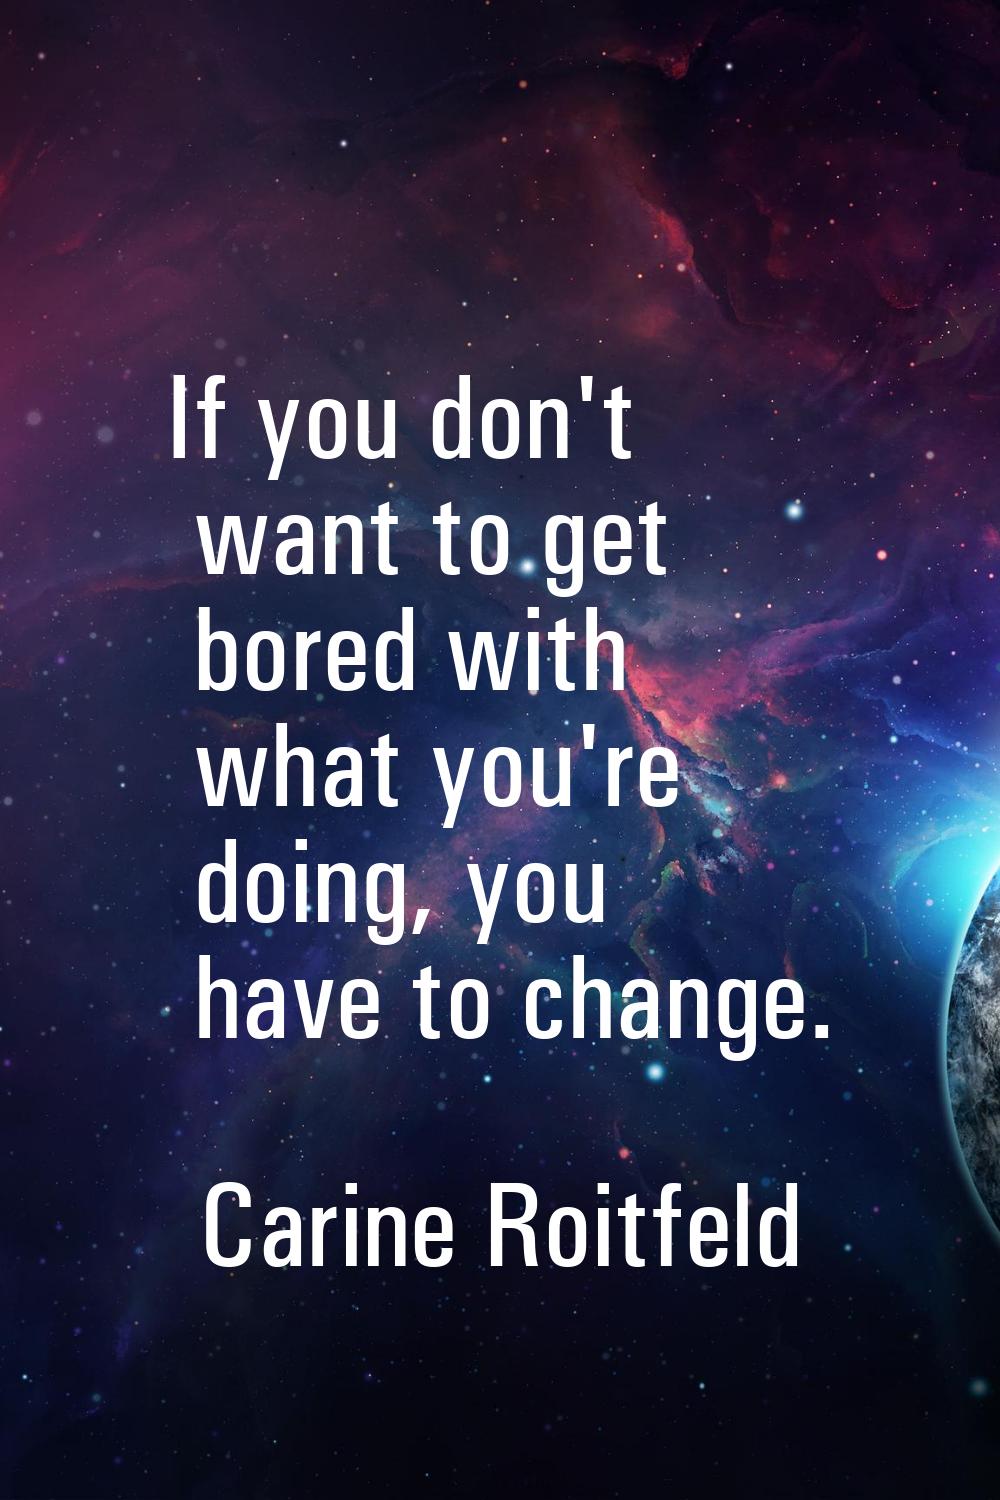 If you don't want to get bored with what you're doing, you have to change.